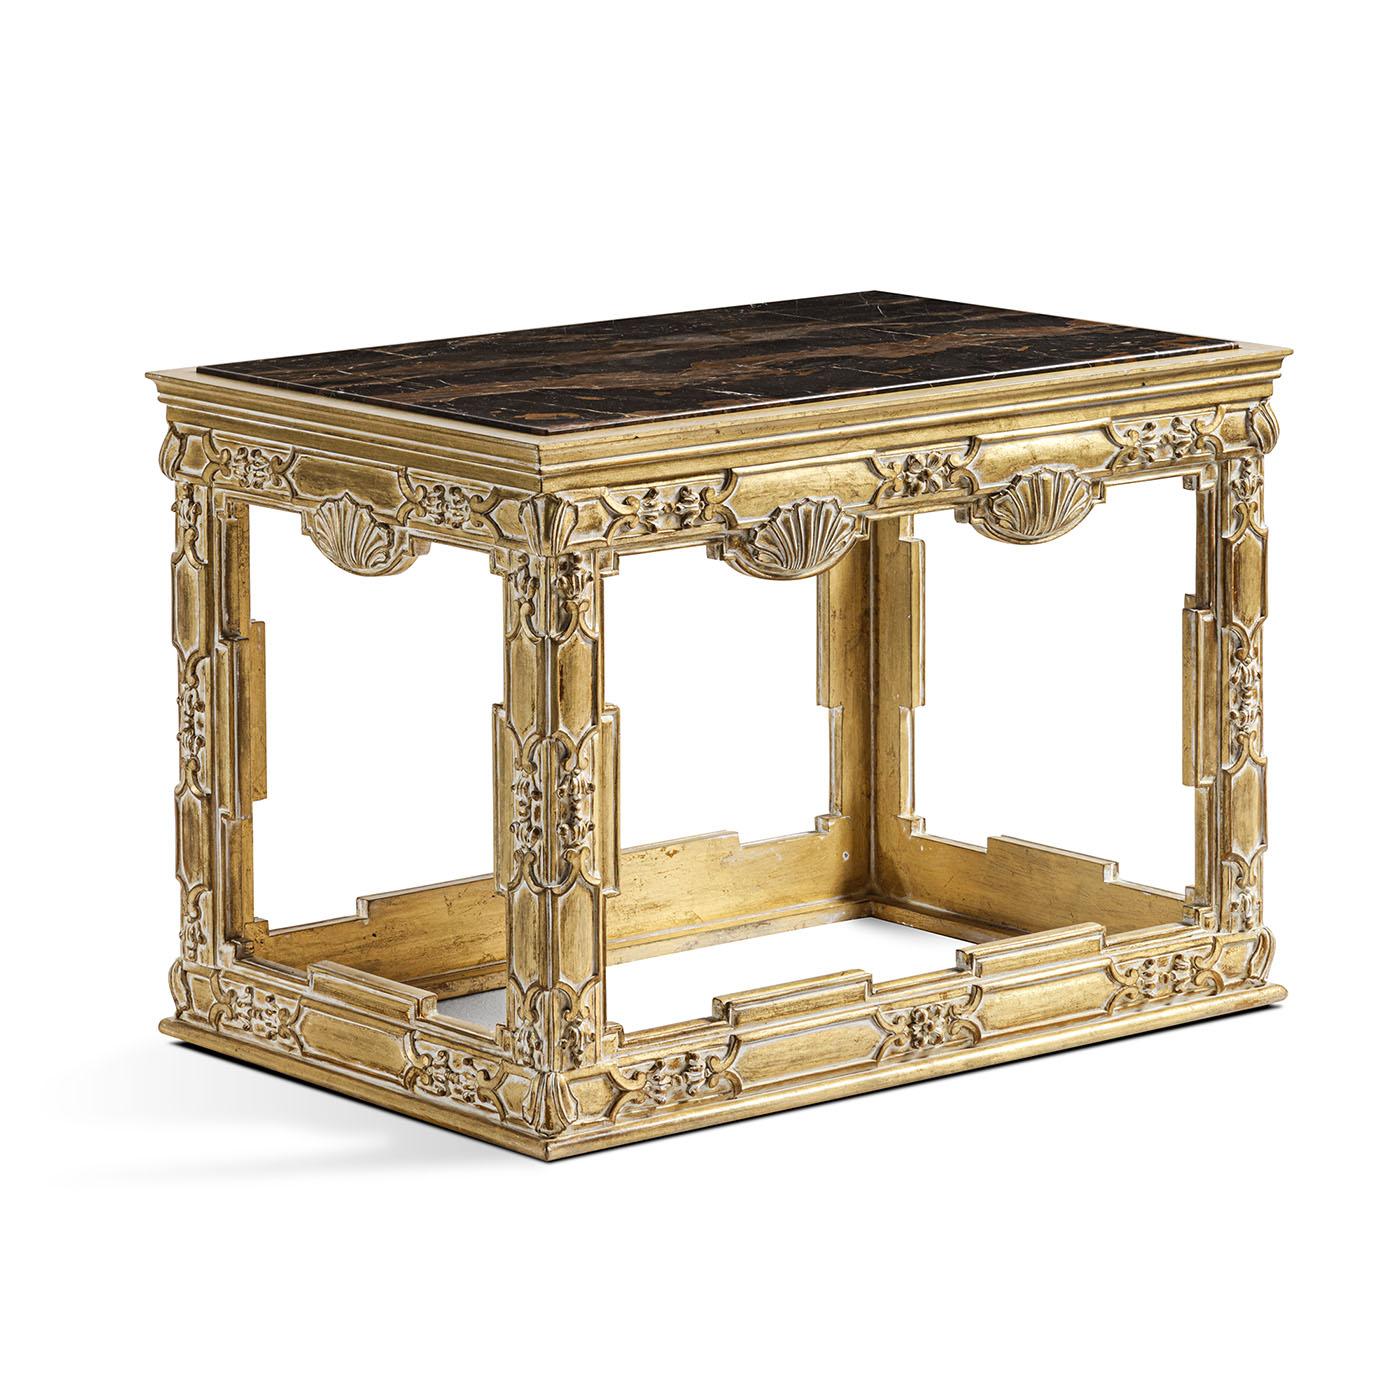 Charming wood side table adorned with hand-carved details. The piece is completed with an elegant marble top.